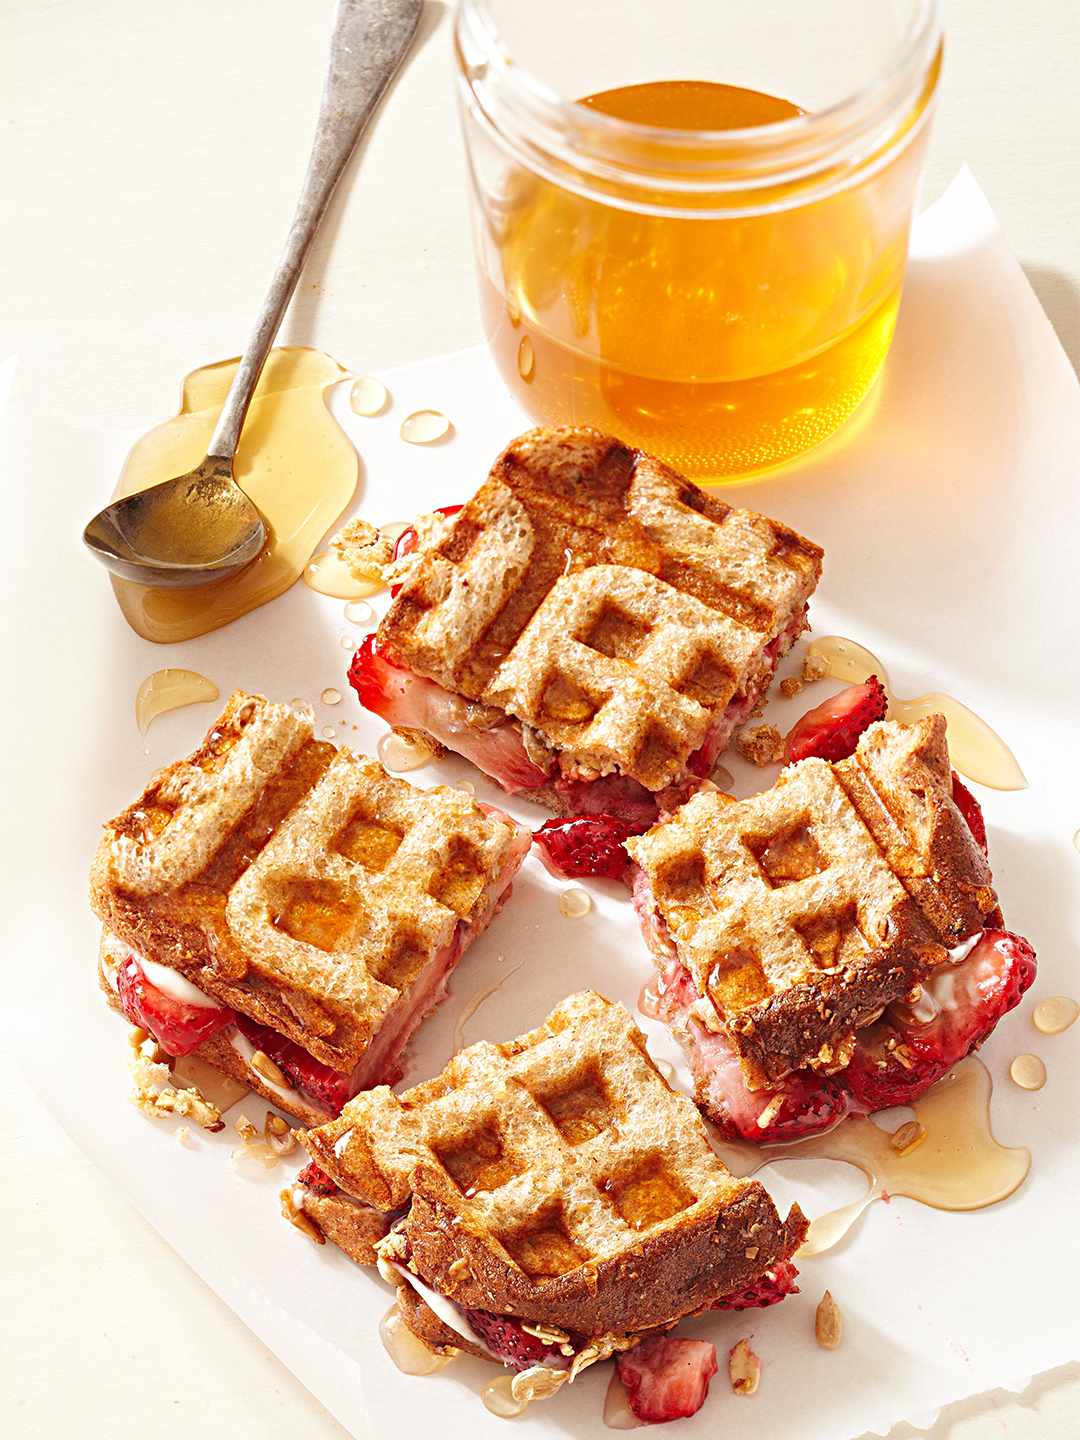 Strawberries and Cream Waffle Sandwiches